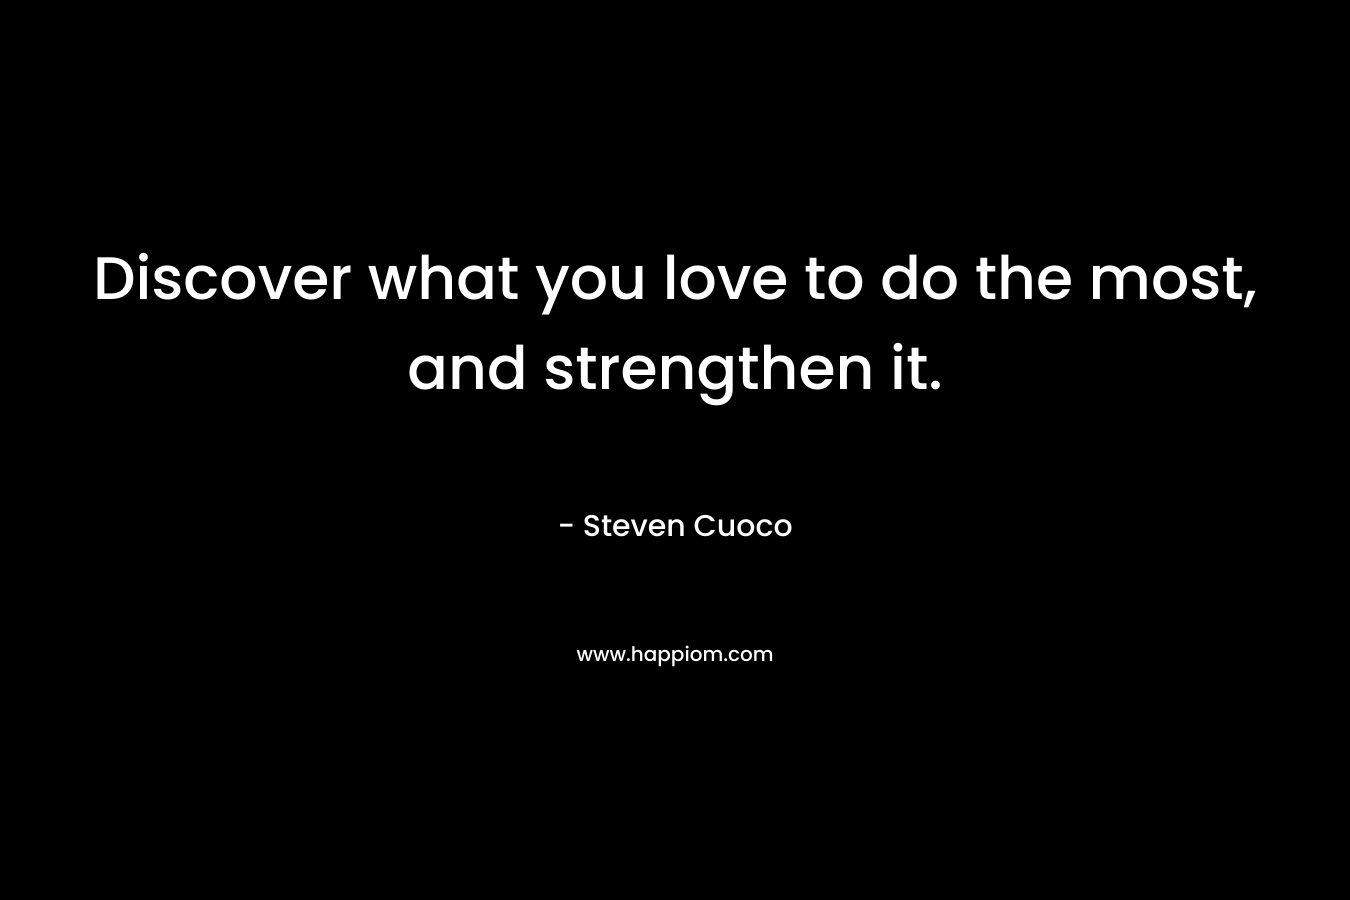 Discover what you love to do the most, and strengthen it. – Steven Cuoco